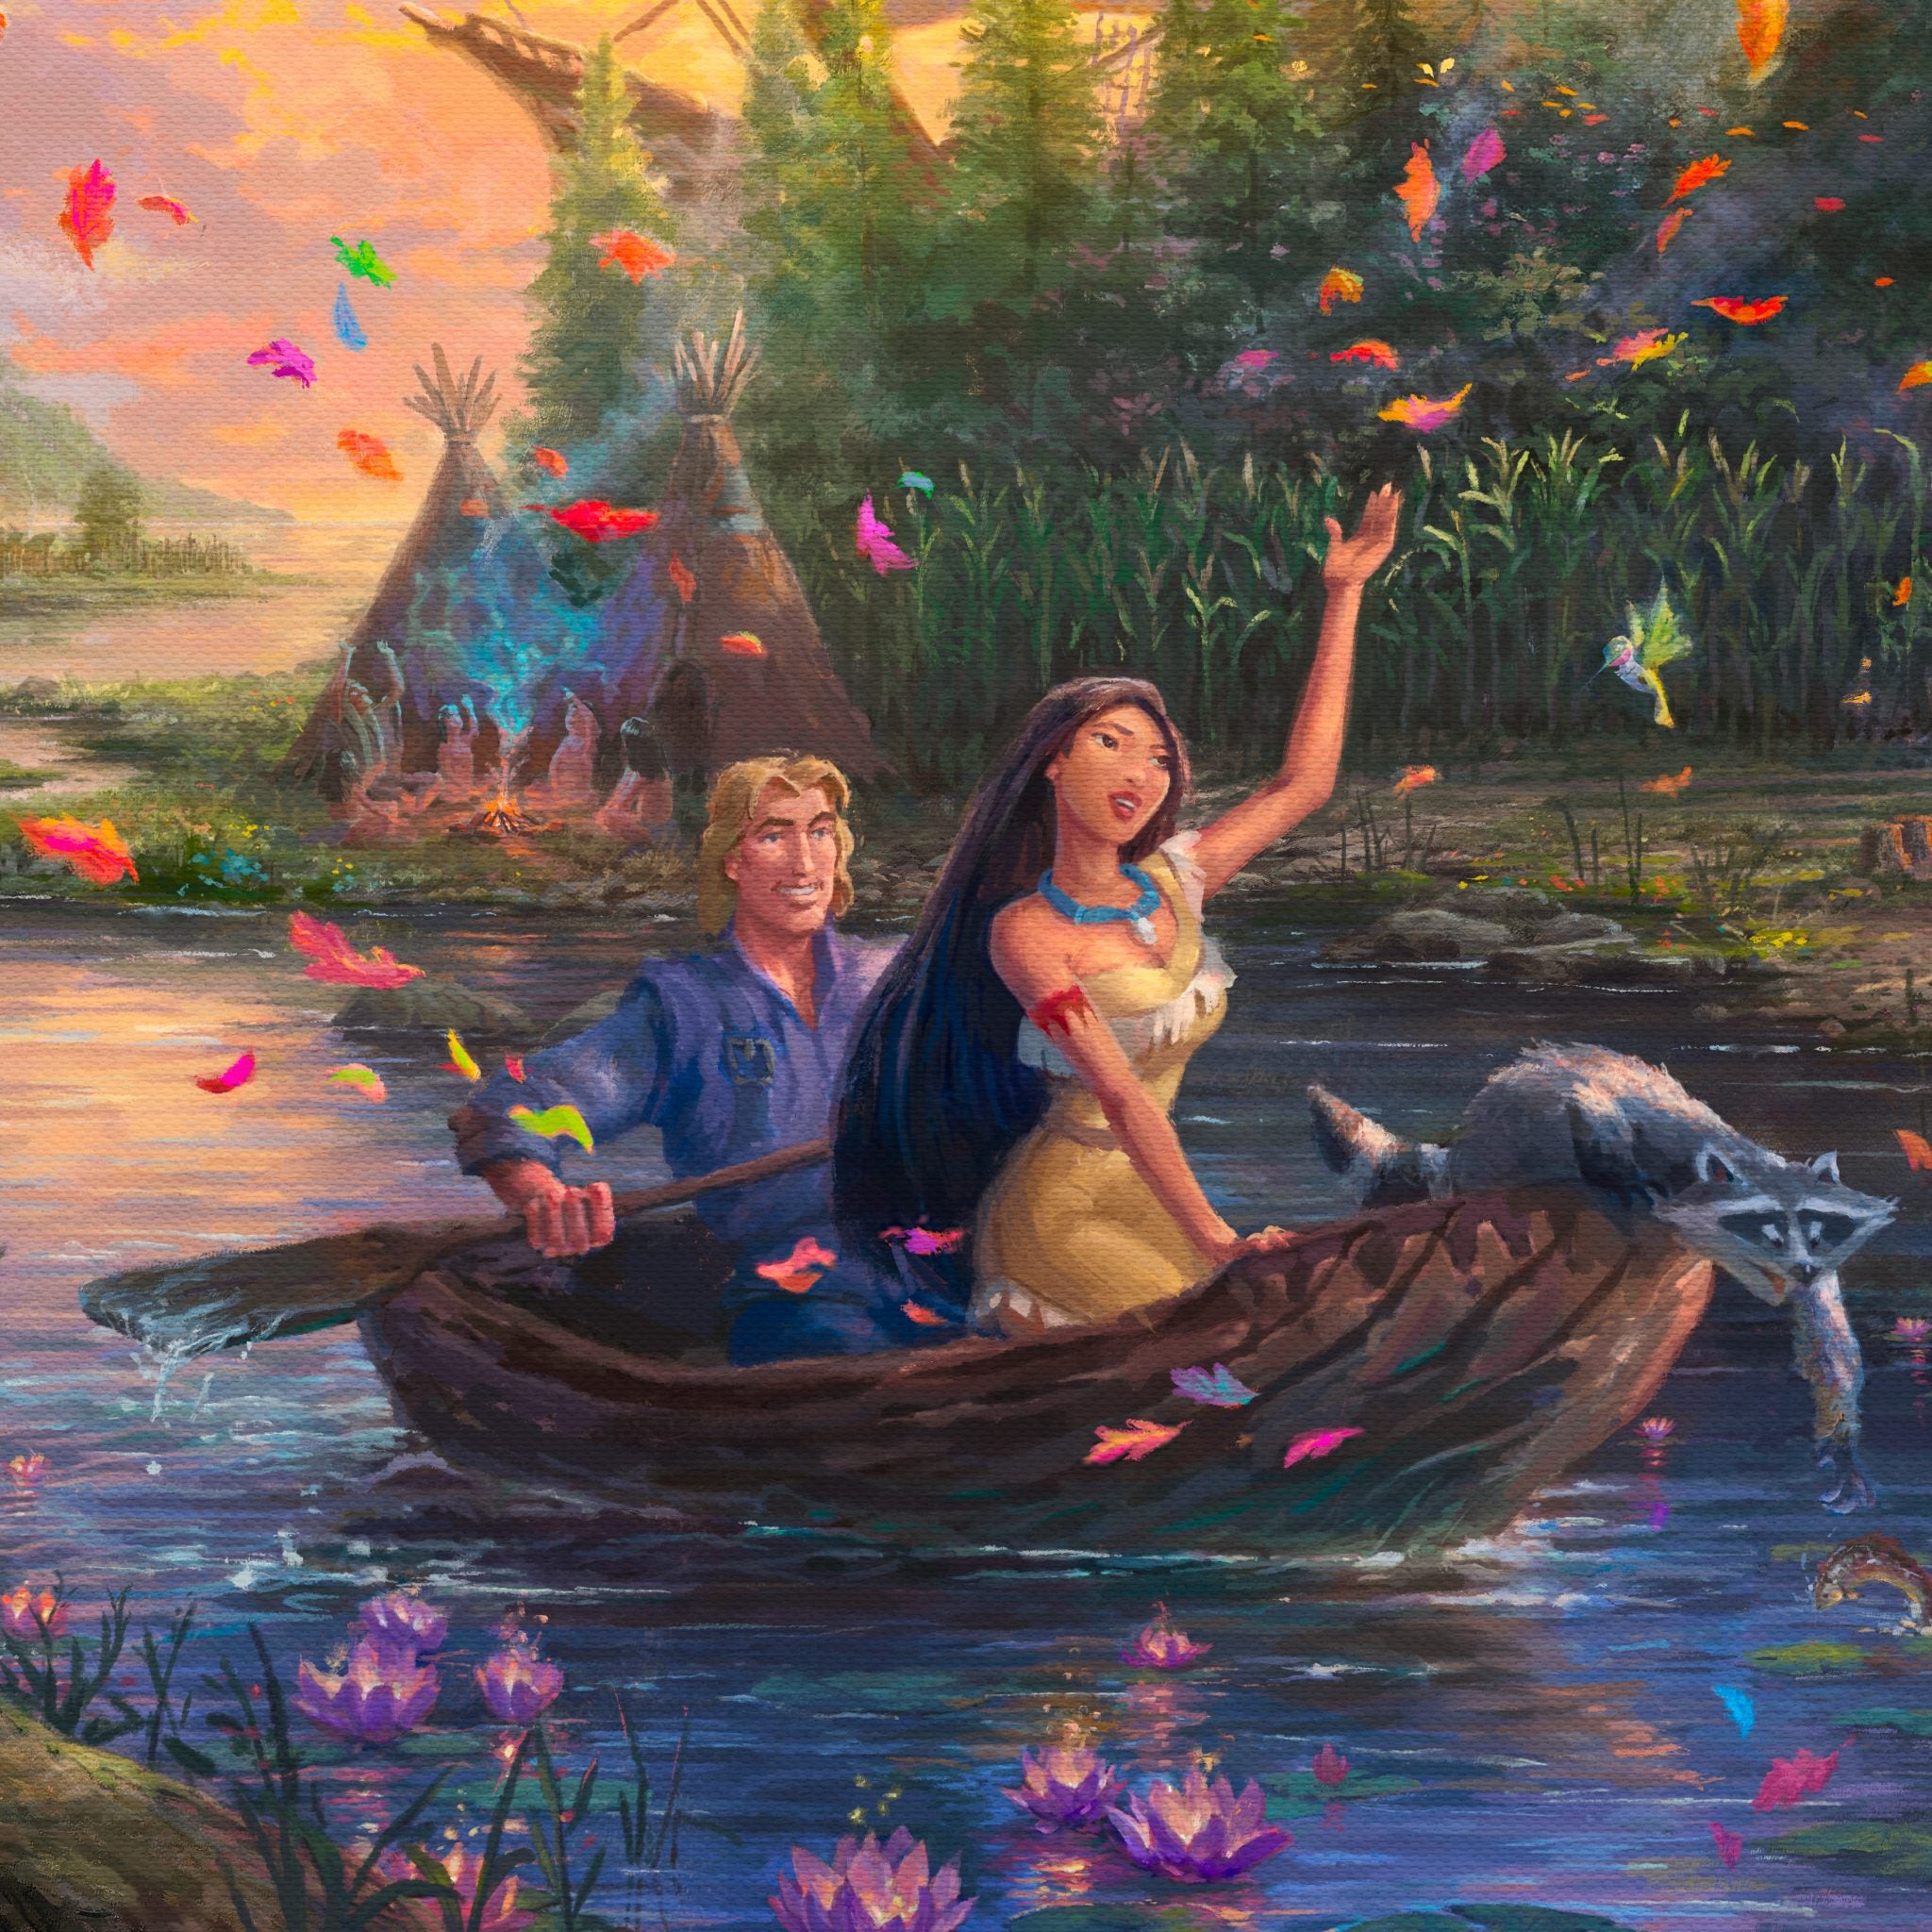 Close-up - #Pocahontas and the Captain on the canoe